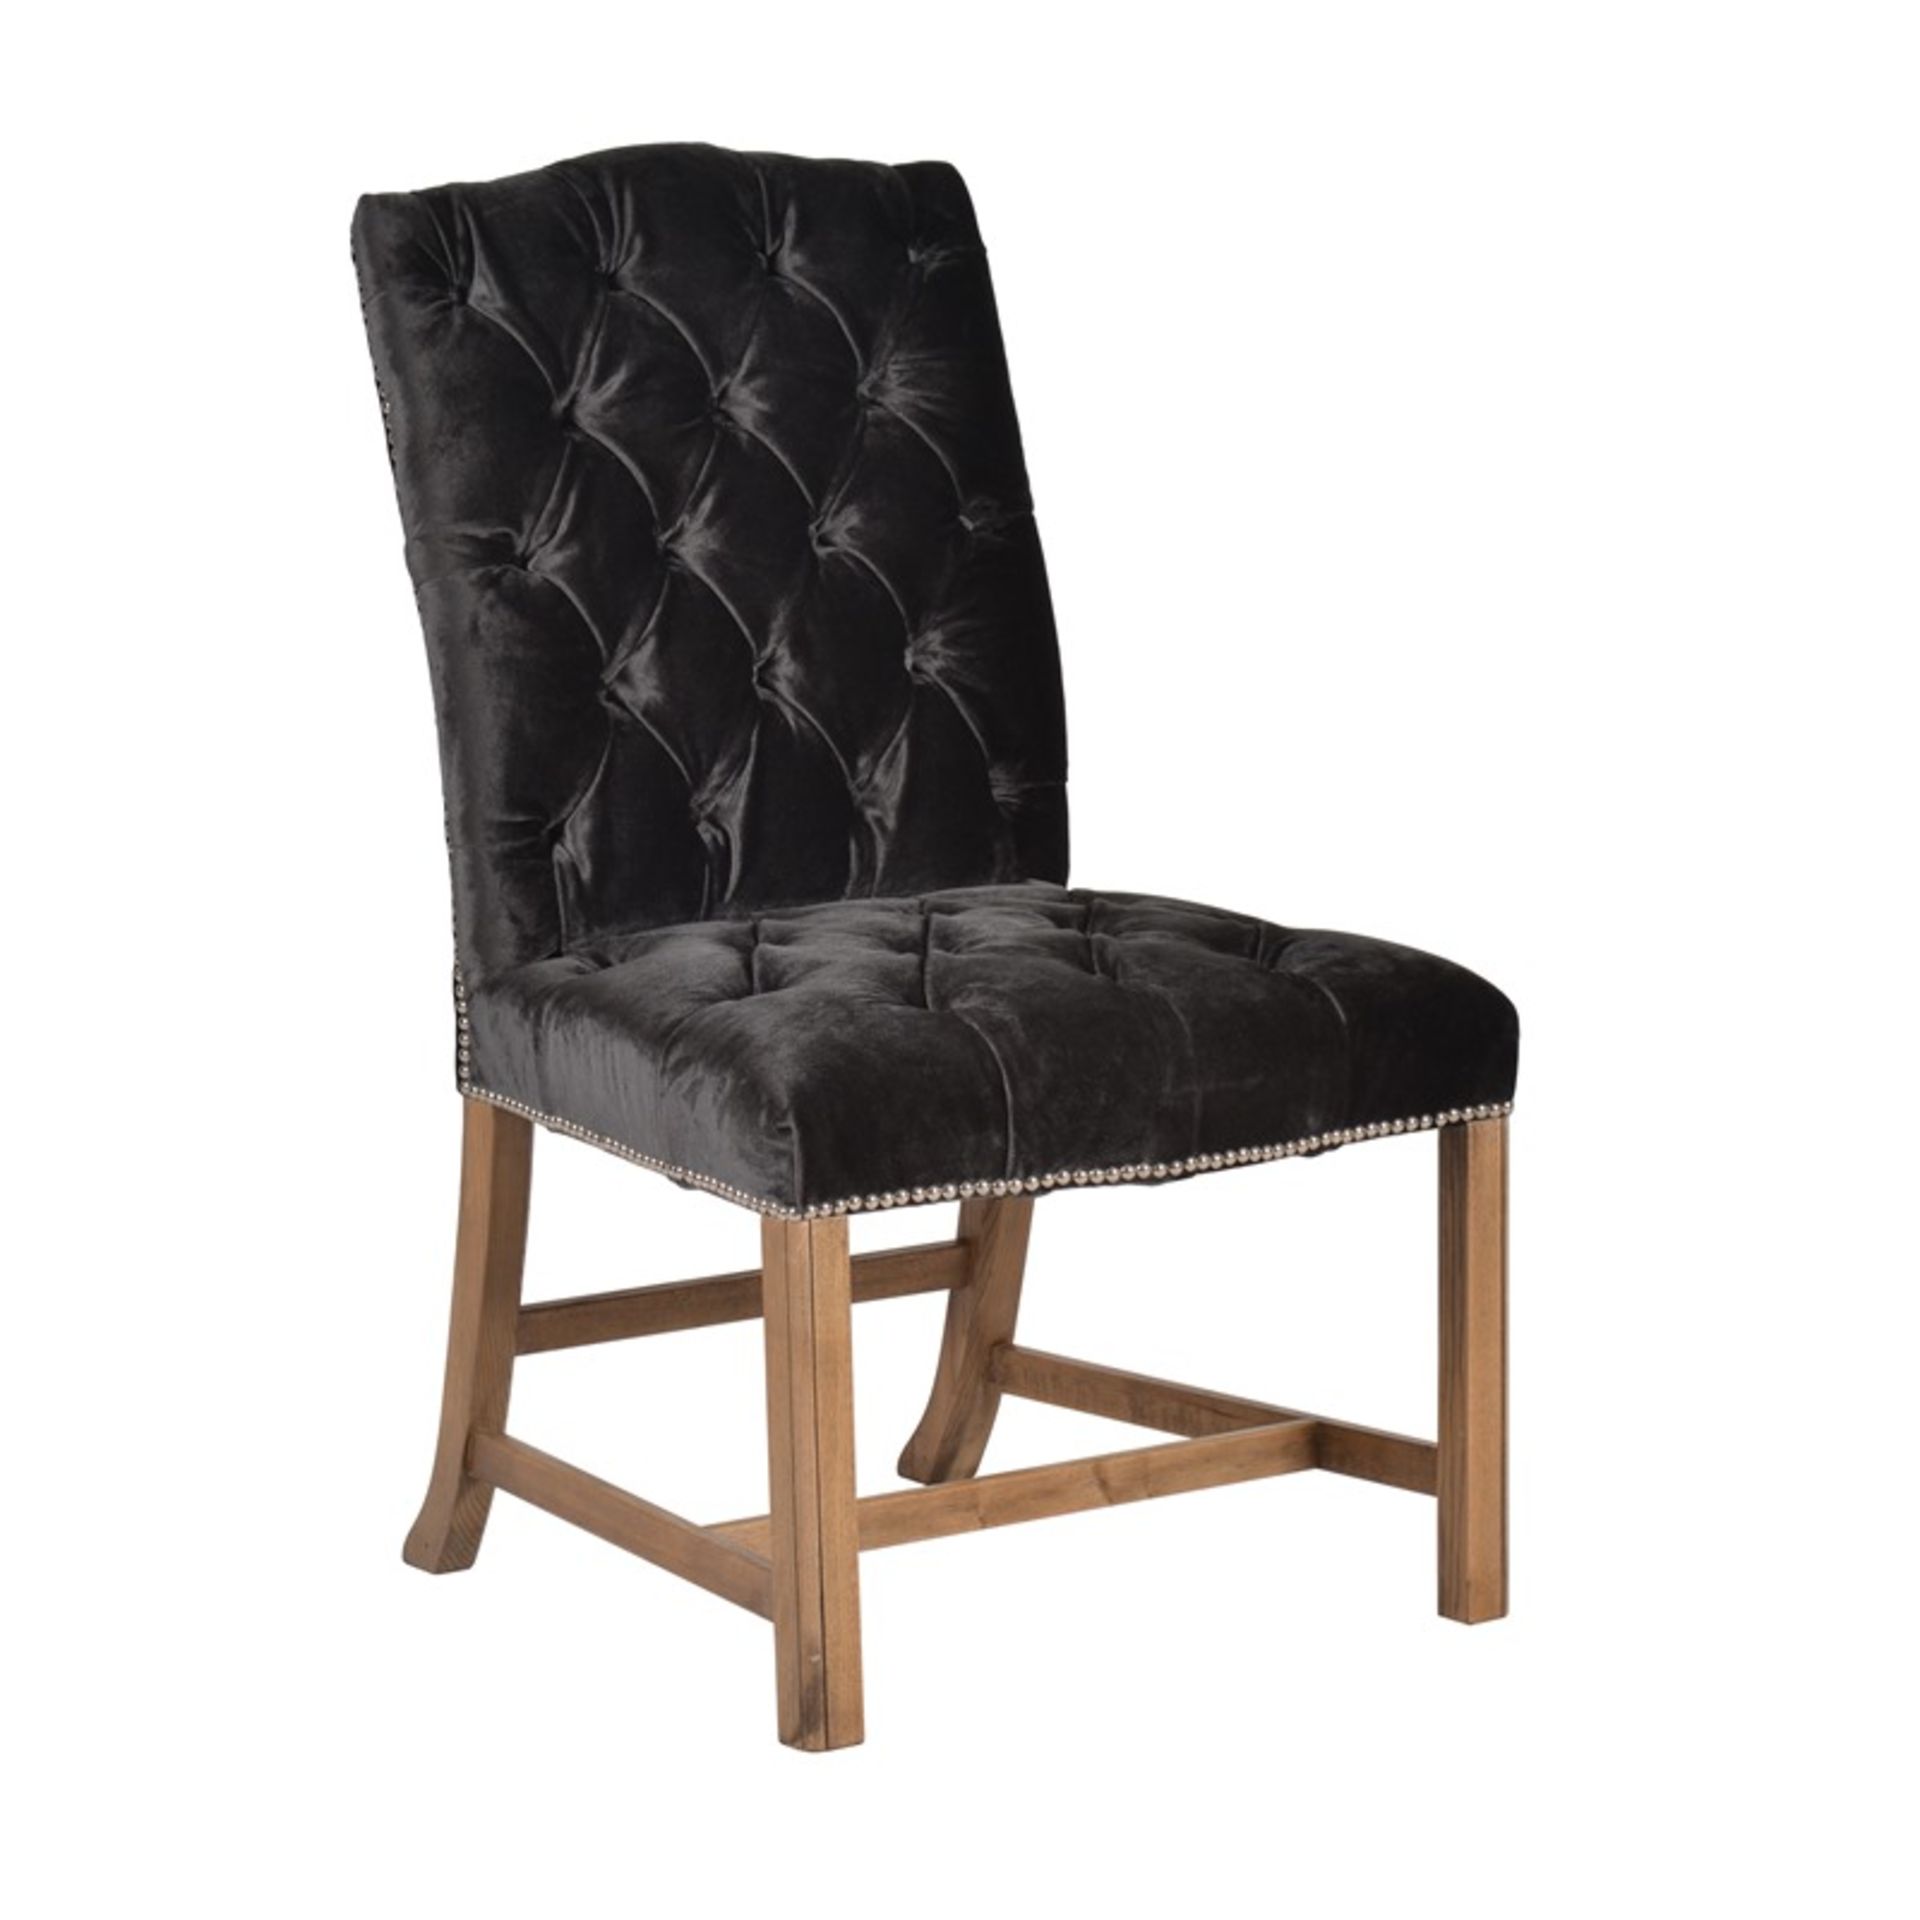 Regency Dining Chair -Siren Dusk & Weathered Oak 60 X 67 X 98cm Inspired By Brighton Pavilion In - Image 2 of 2